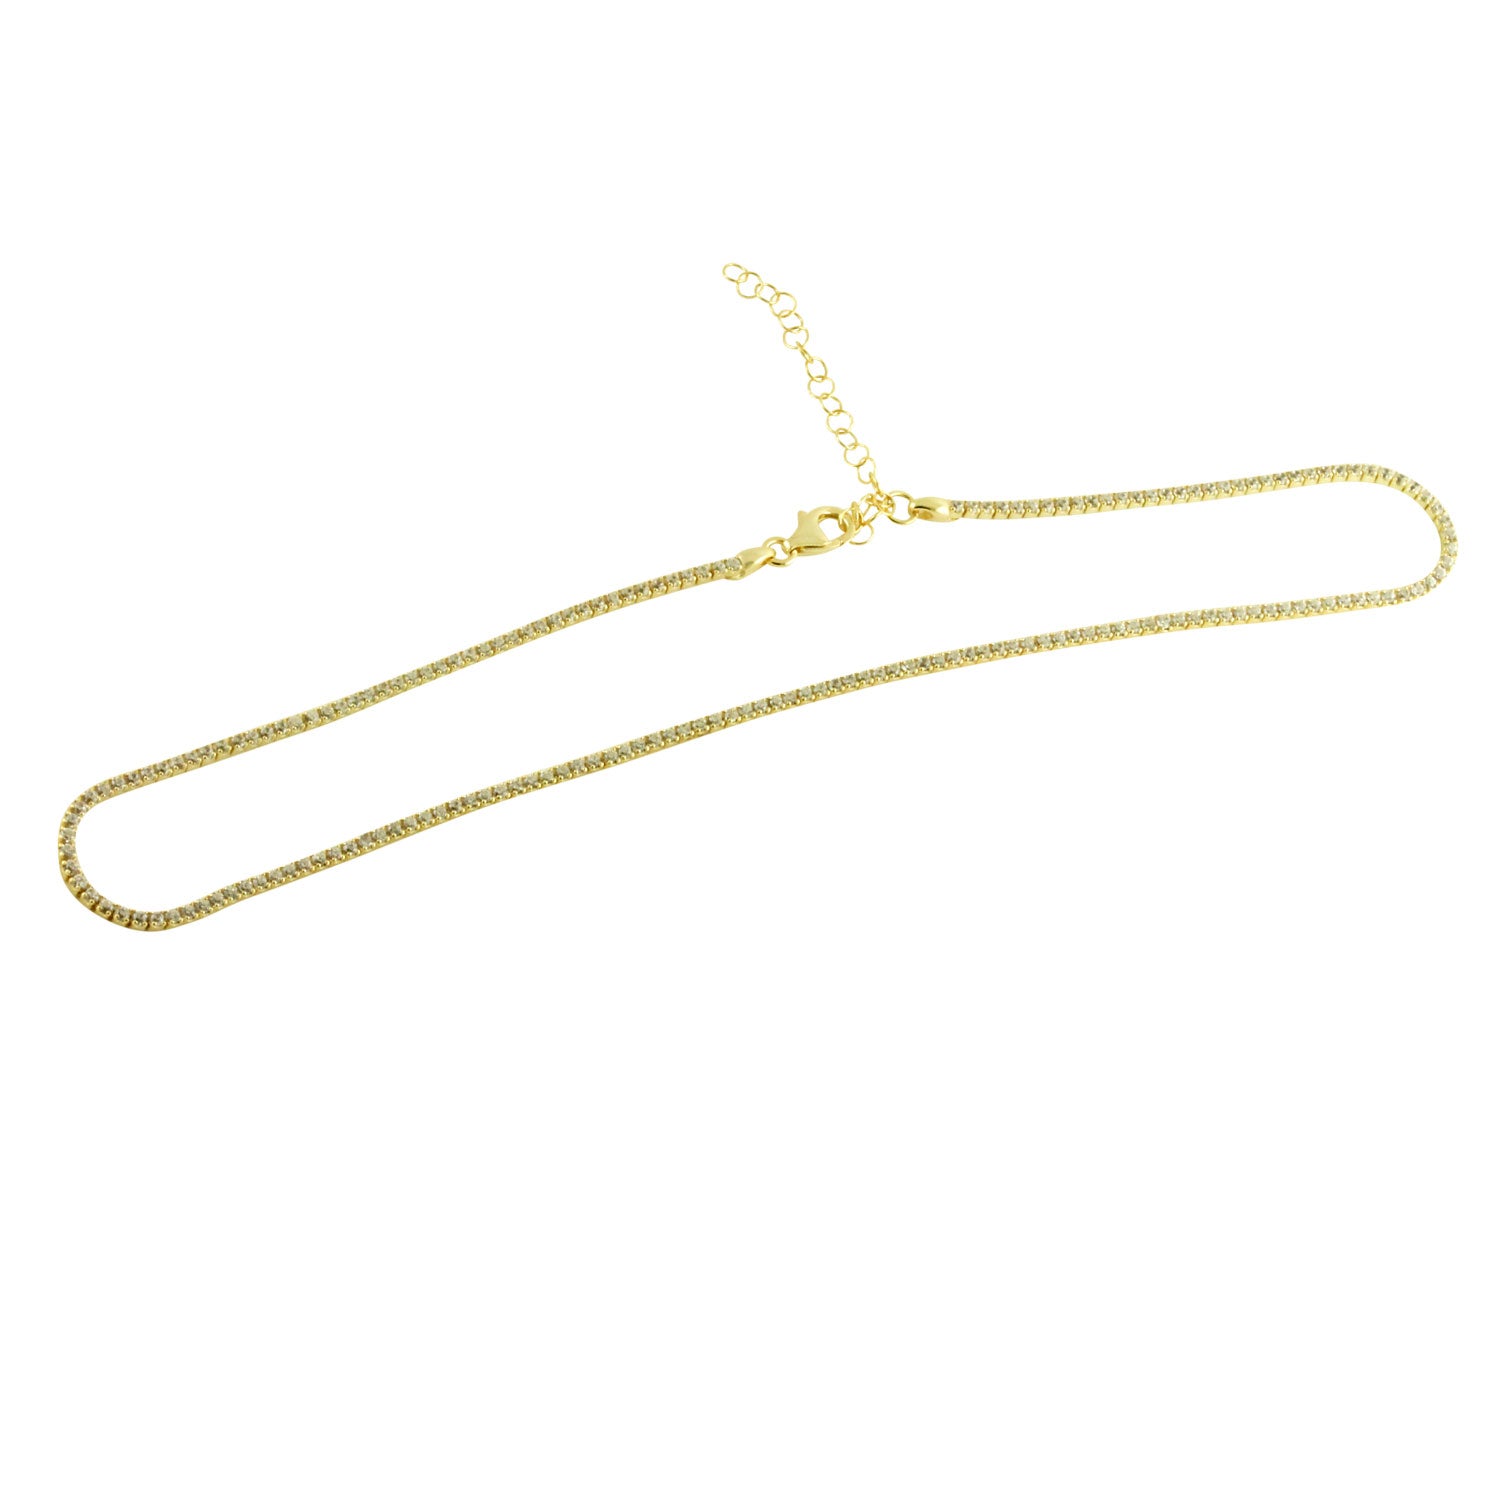 Gold-Dipped CZ Stone Choker Necklace